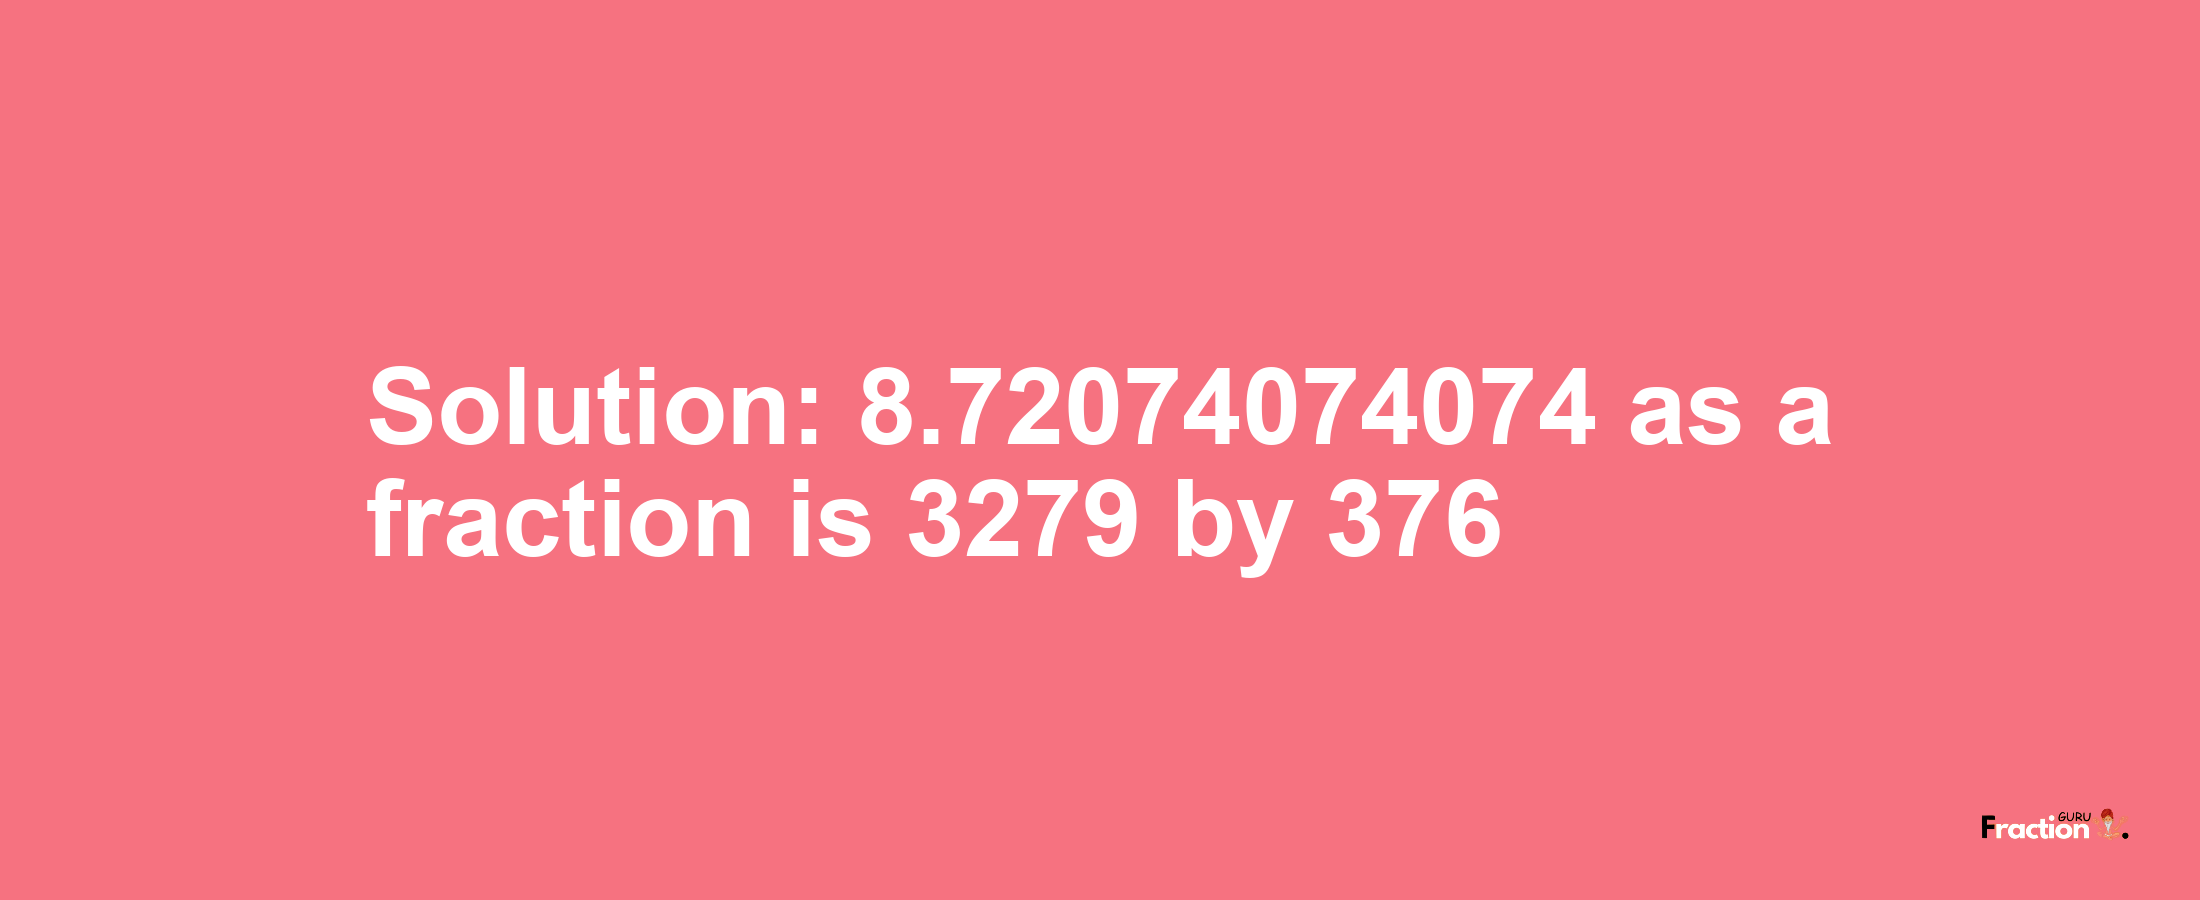 Solution:8.72074074074 as a fraction is 3279/376